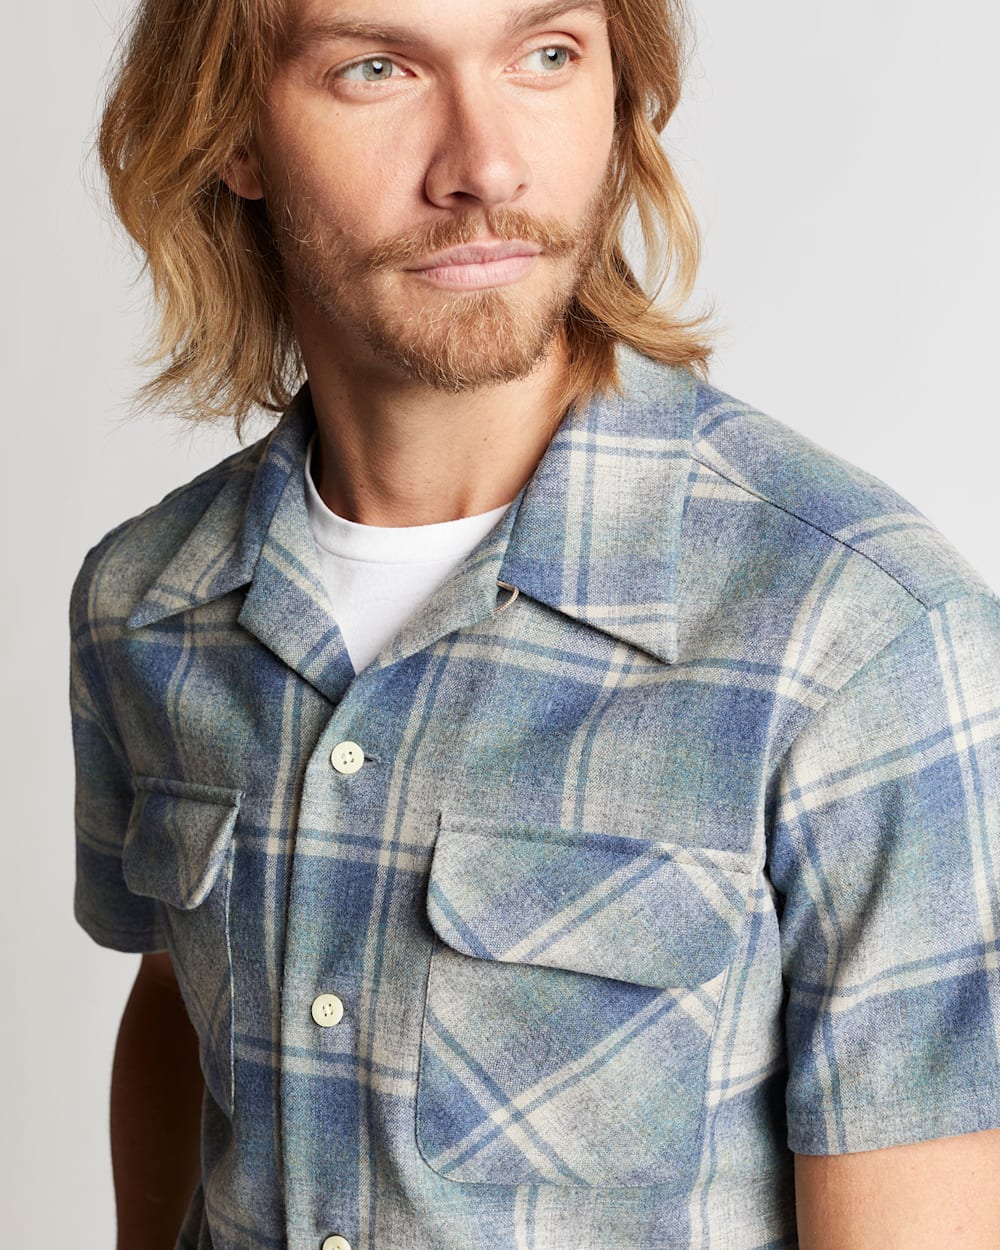 ALTERNATE VIEW OF MEN'S PLAID SHORT-SLEEVE BOARD SHIRT IN BLUE MIX PLAID image number 4